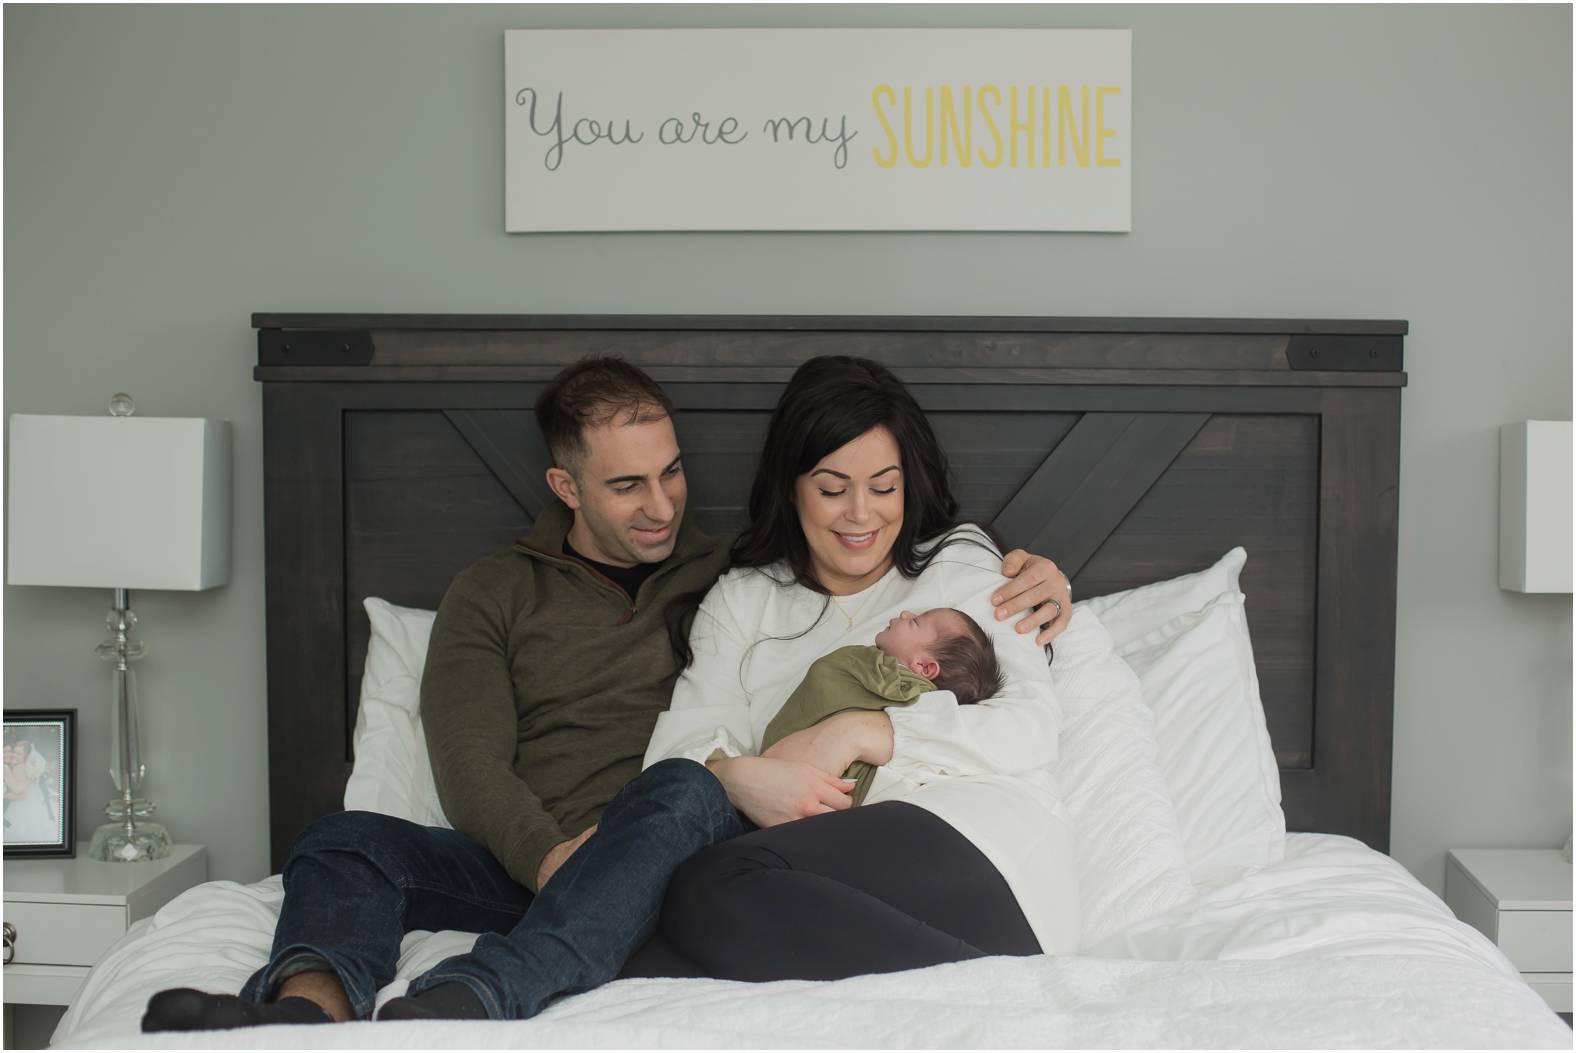 Parents snuggle newborn baby boy swaddled in olive green blanket on the bed.